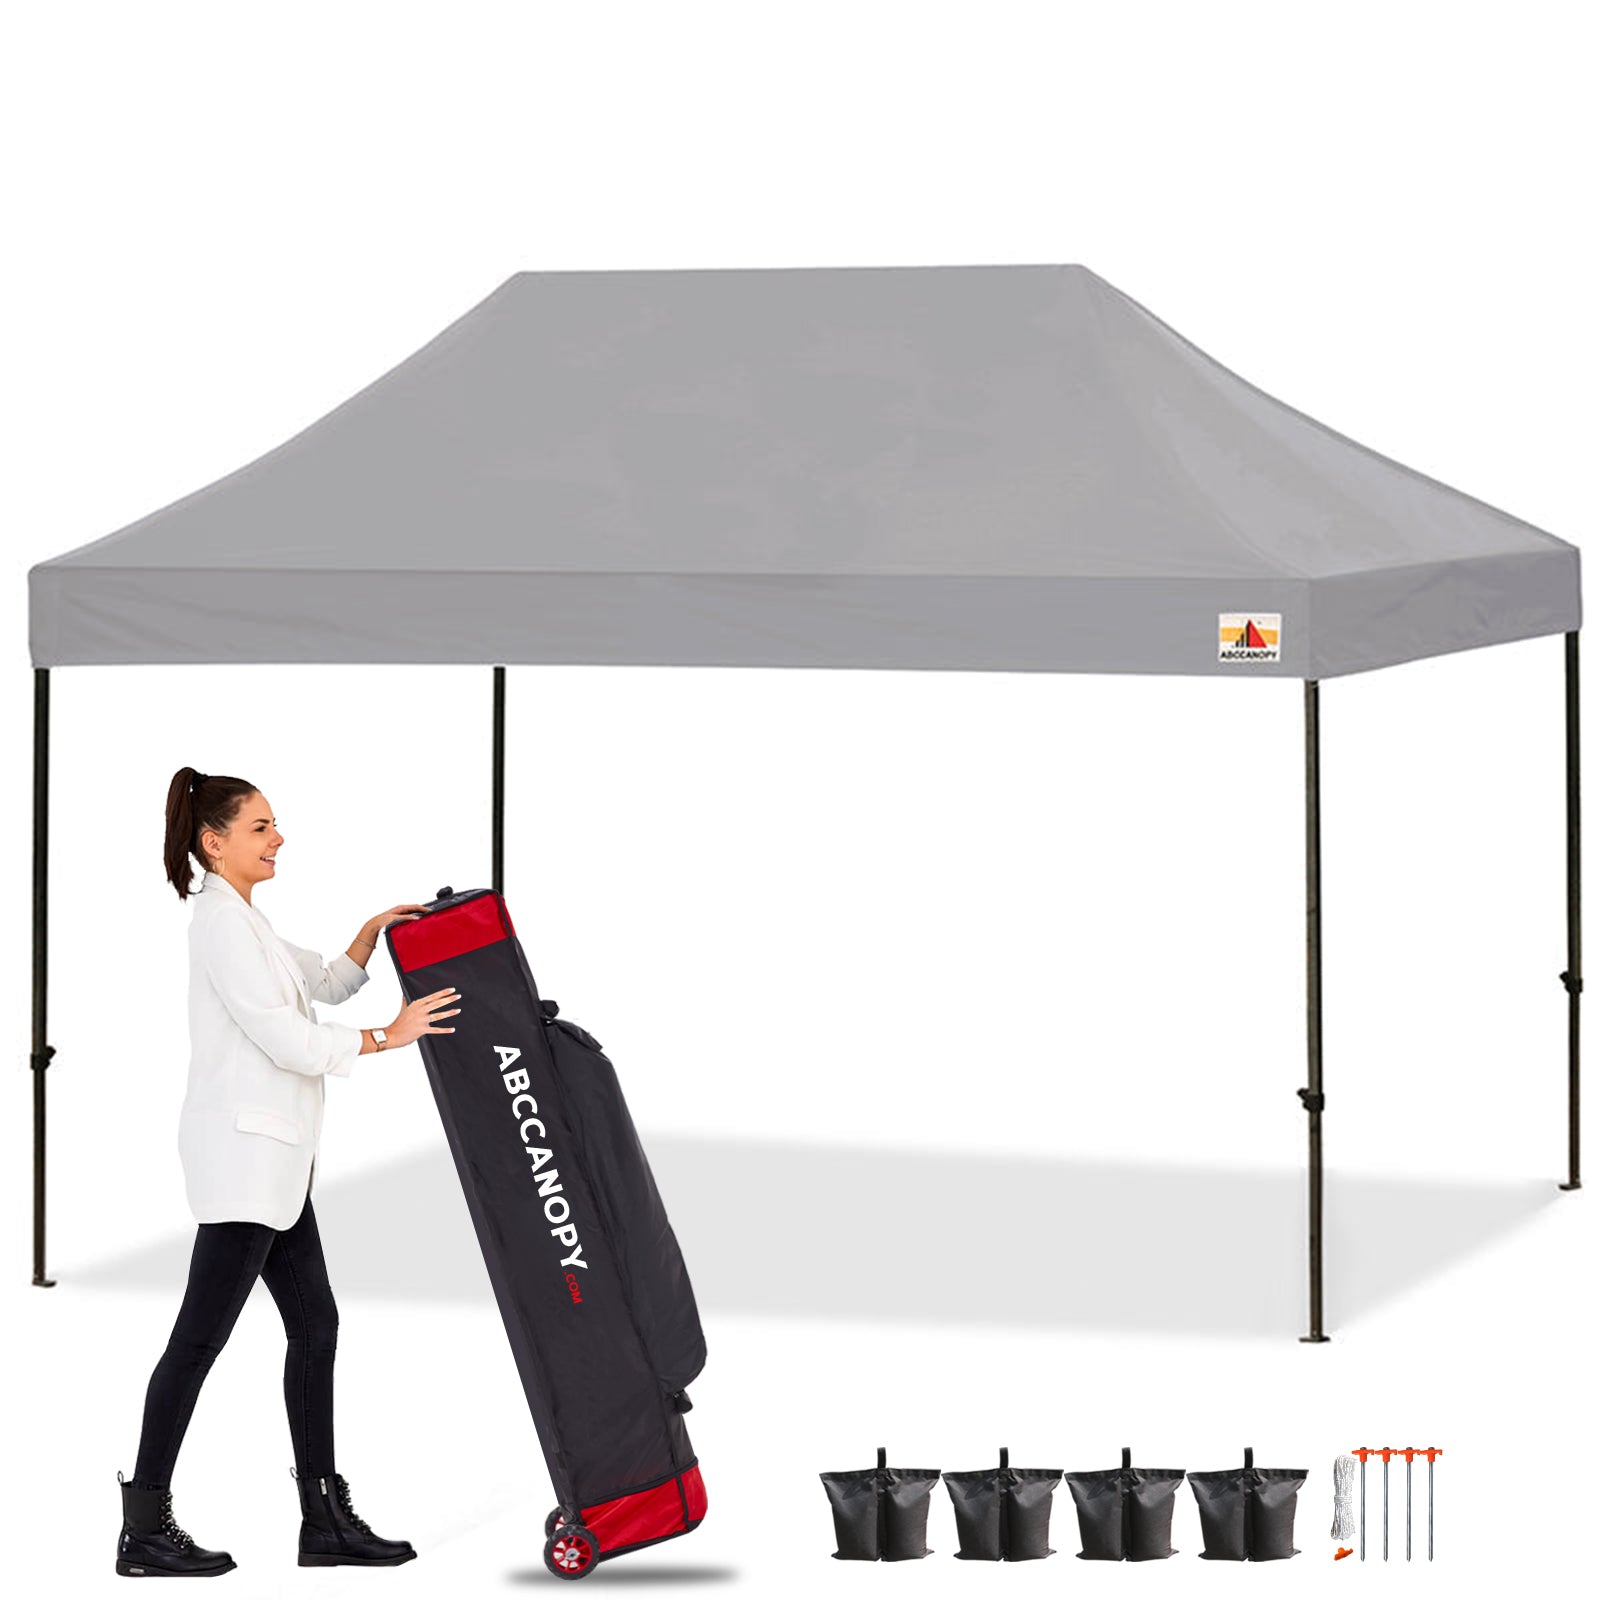 S1 Commercial Durable Easy Pop Up Canopy 10x15 Instant Shelter